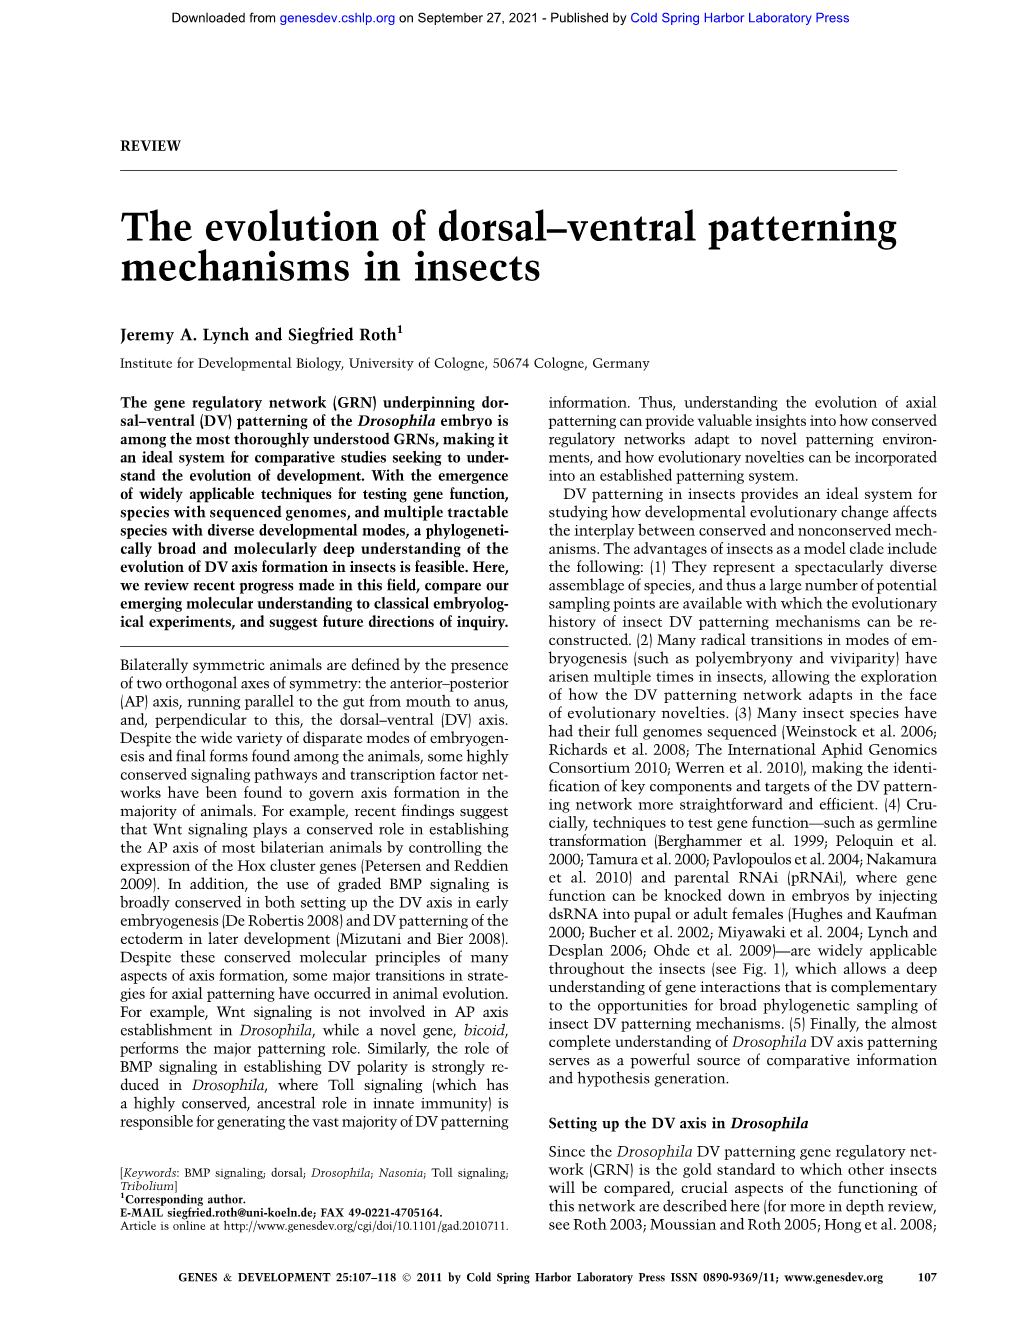 The Evolution of Dorsal–Ventral Patterning Mechanisms in Insects